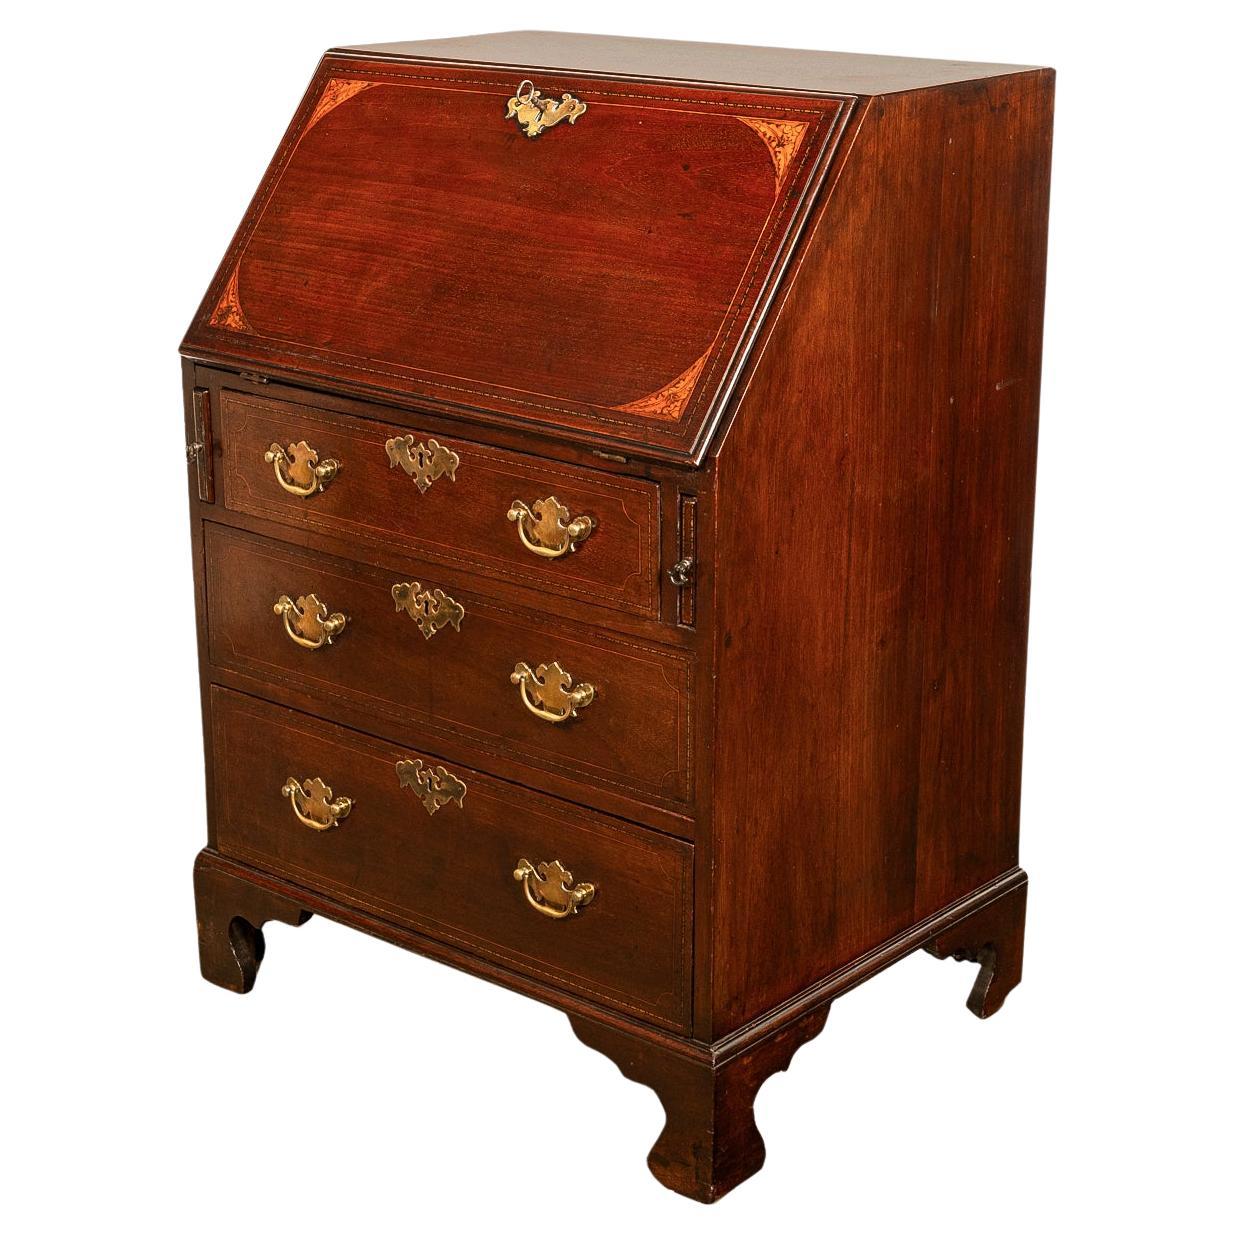 1780s Case Pieces and Storage Cabinets